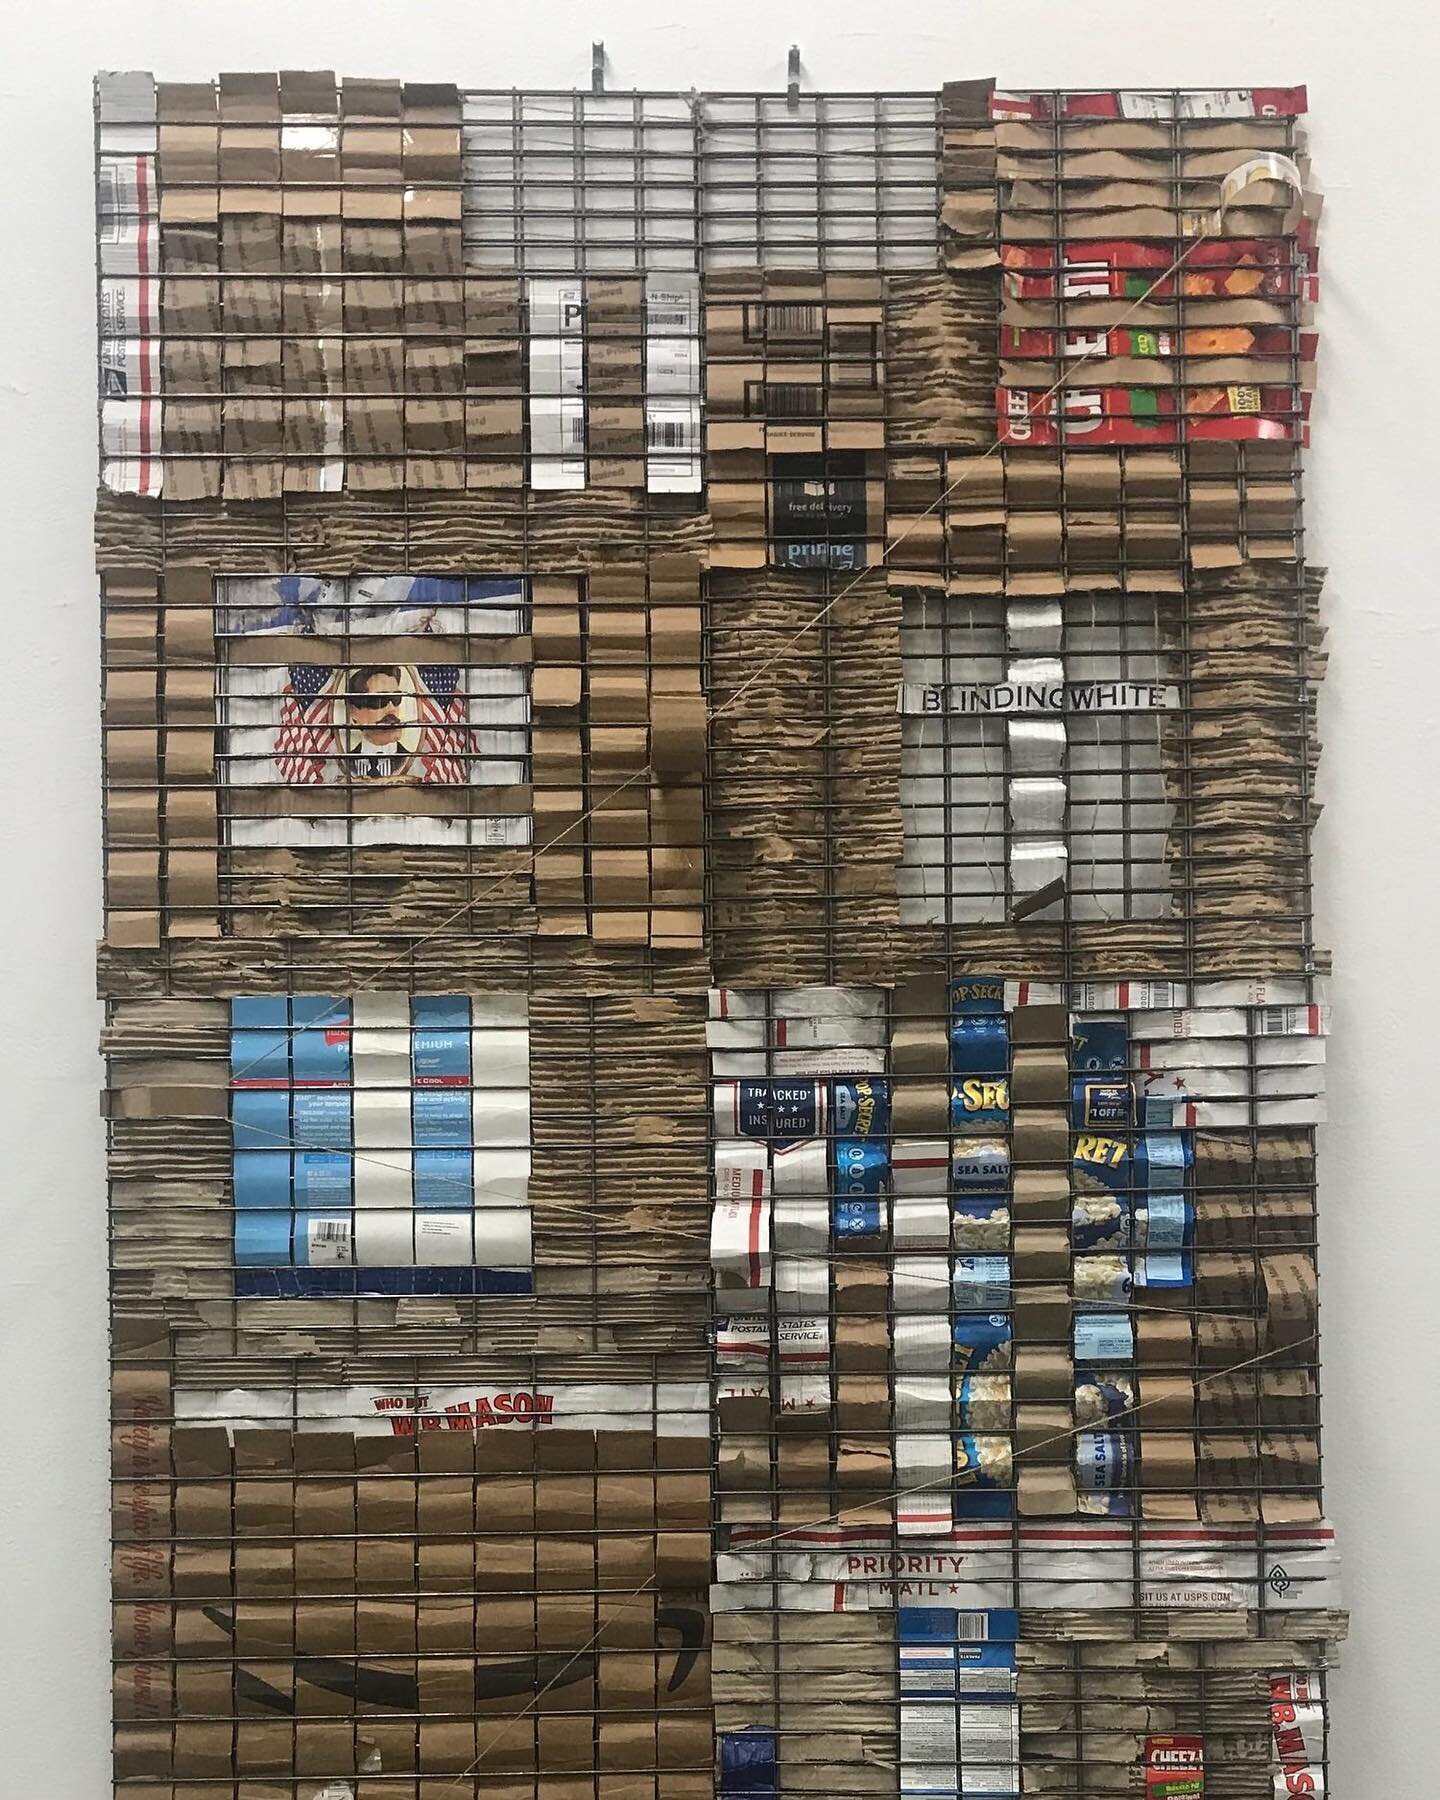 Wall Weaving Capitalism
  Another work in my weaving lab series, in this piece I comment on the system of Capitalism through the materials and logos that I weave into the metal grid. This was made when I was living in the nations capital through a ti